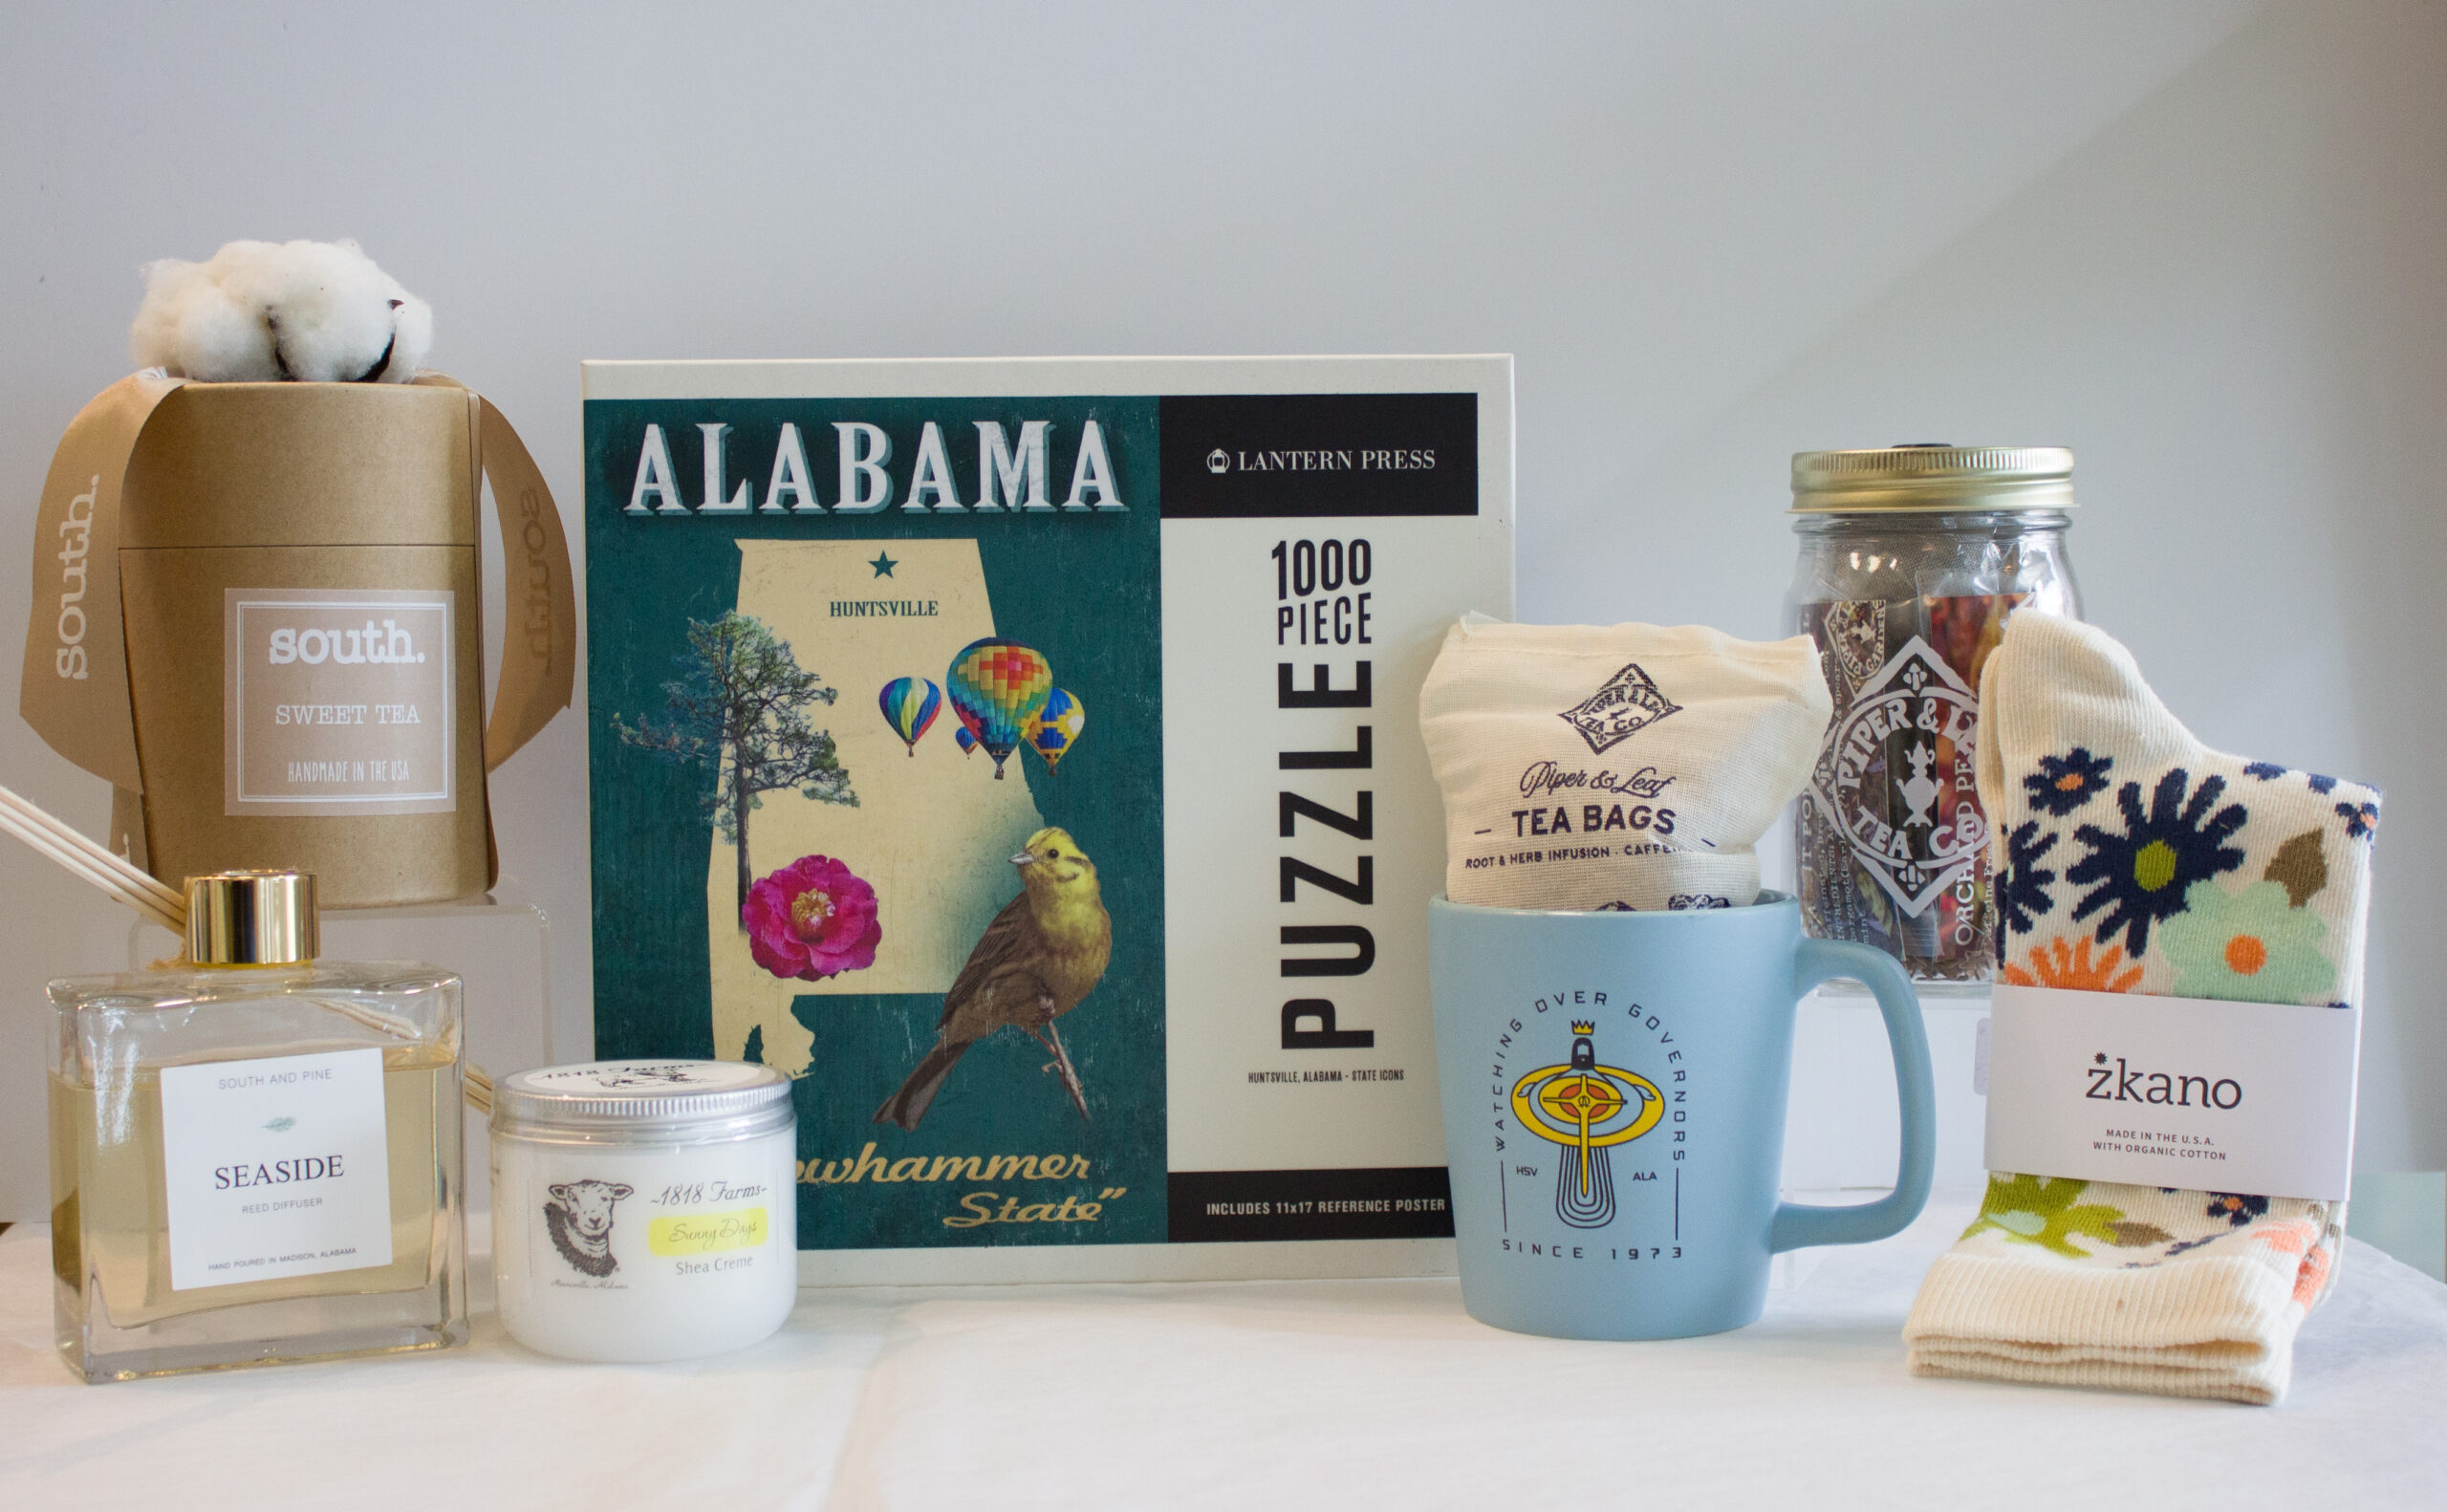 a collection of items from local businesses: candles from South candles, a puzzle in the state of Alabama, tea from Piper & Leaf, a mug from Rocket City Apparel, socks from zkano, skincare from 1818 farms, and a diffuser from South and Pine